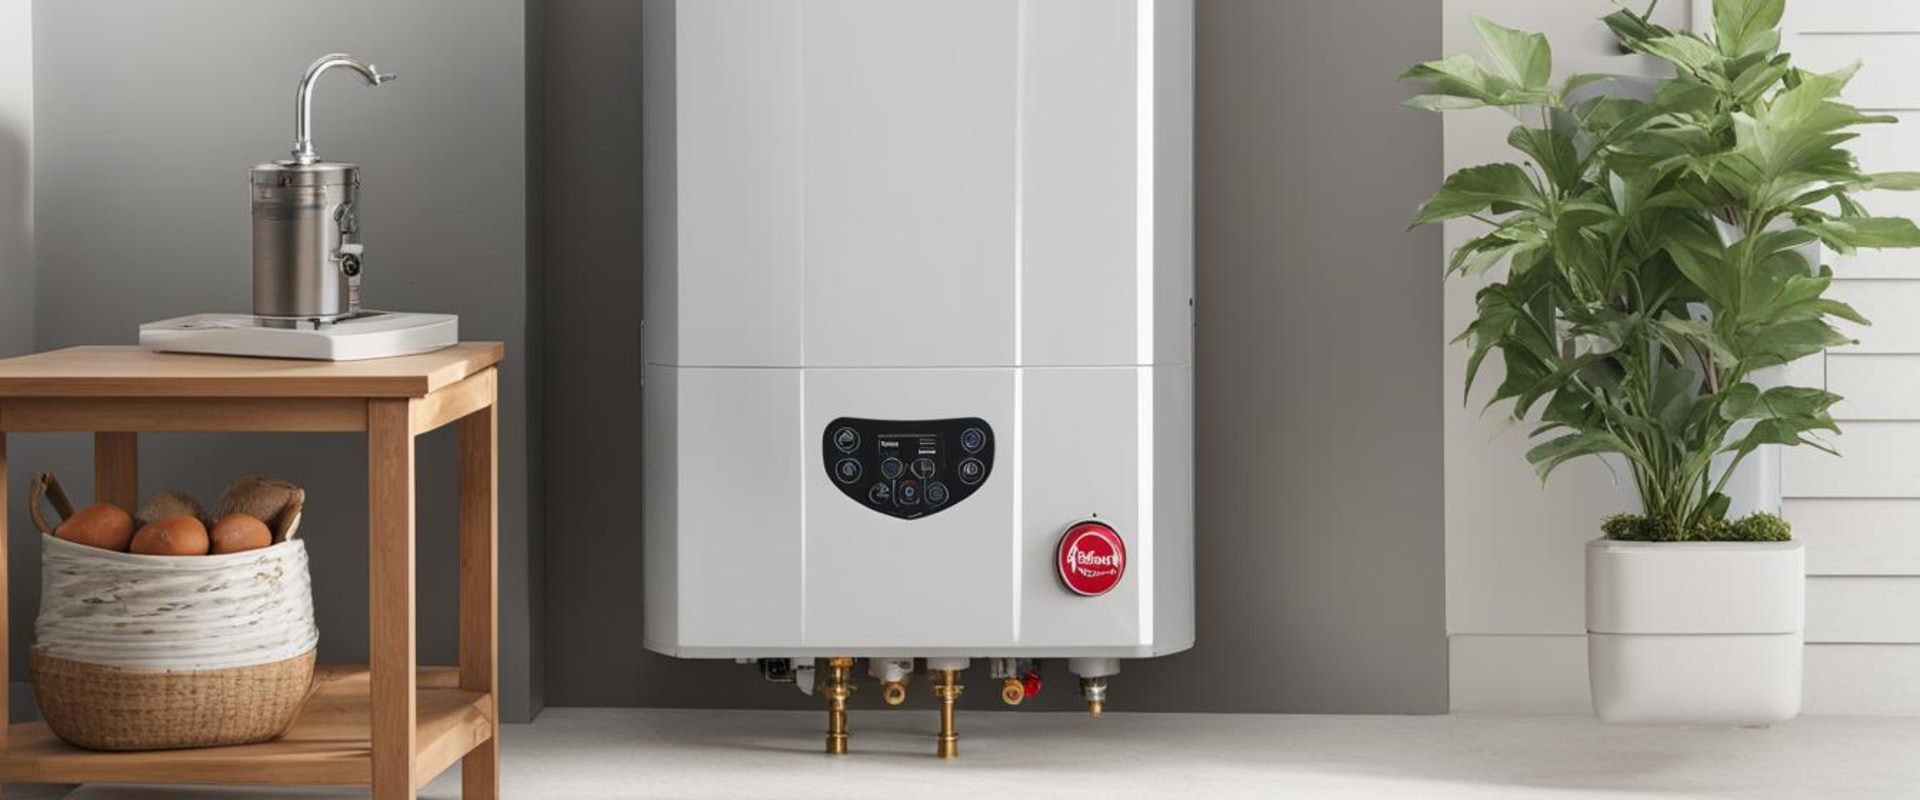 How to Extend the Lifespan of Your Rheem Water Heater